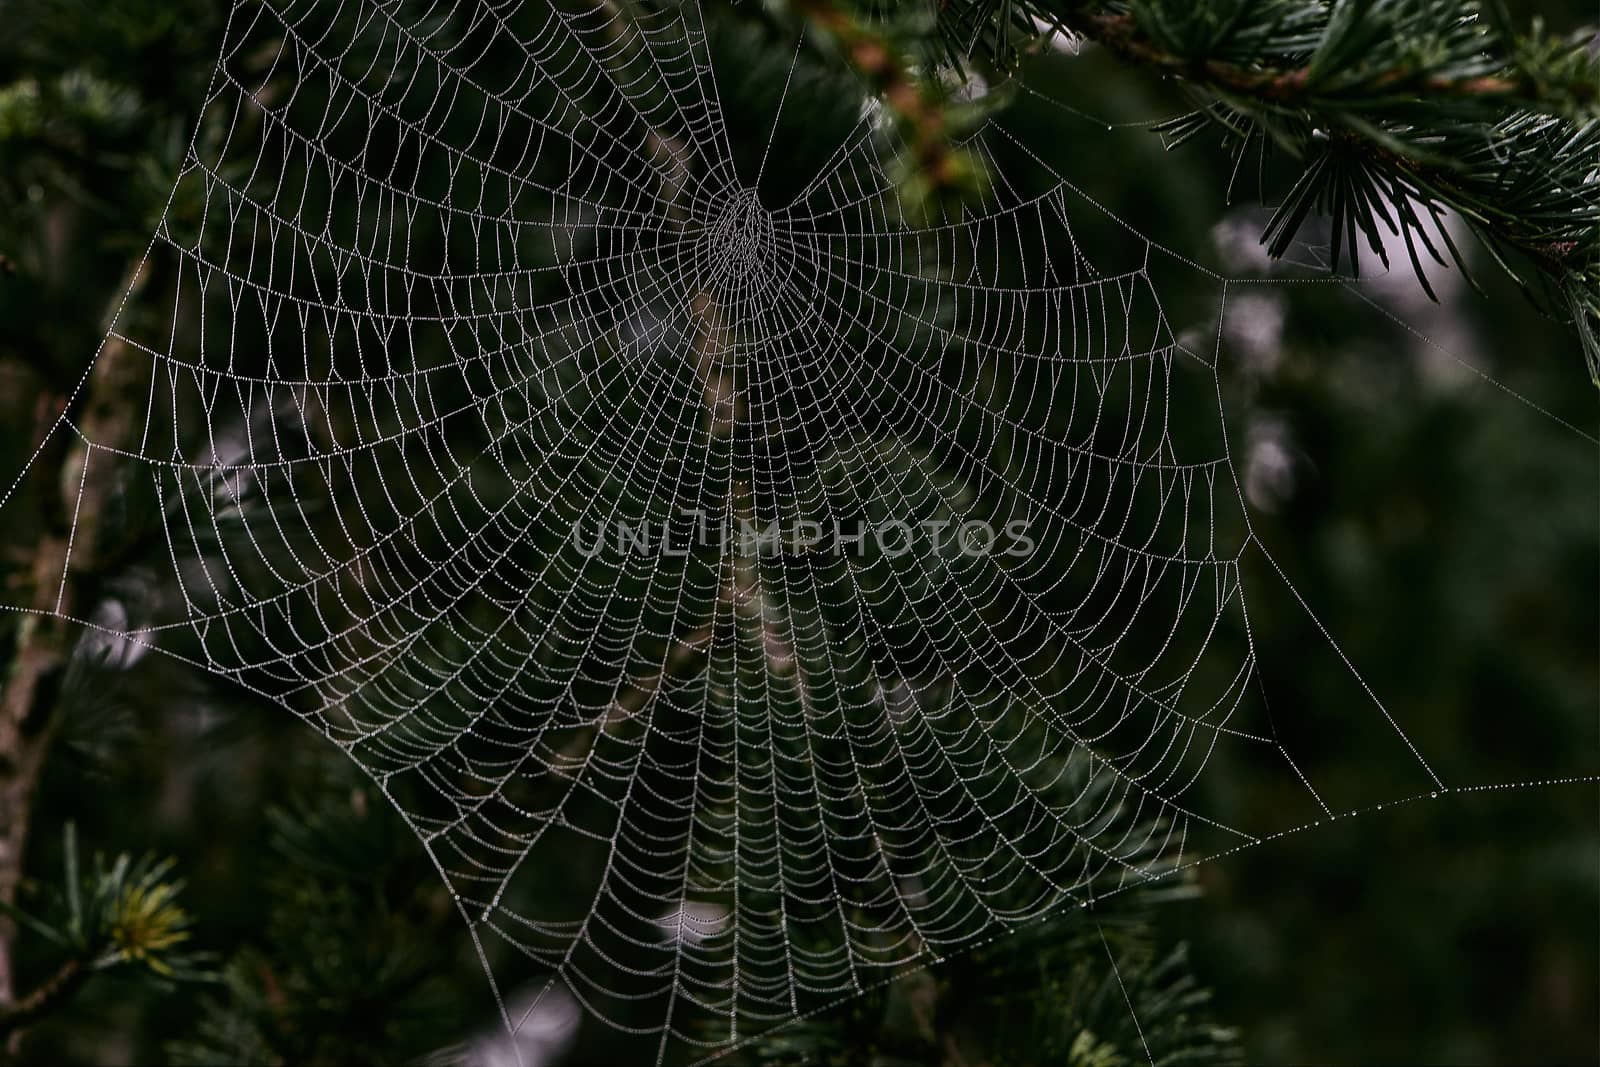 Spider web covered with dew drops between tree branches by SoniaKarelitz